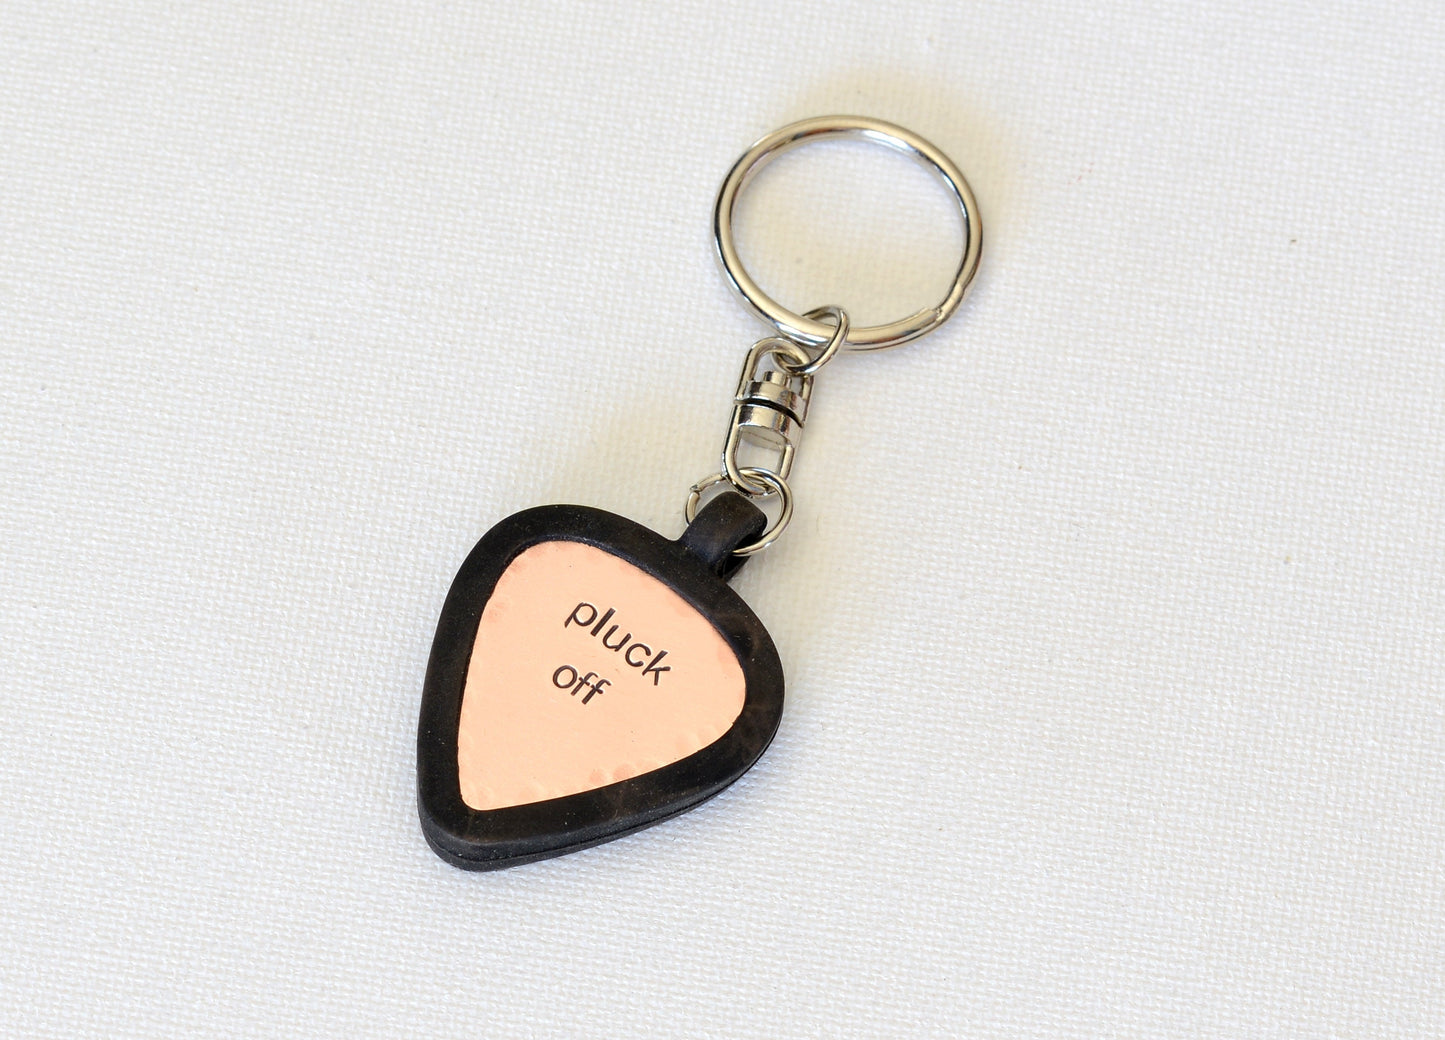 Pluck off copper guitar pick keychain with holder